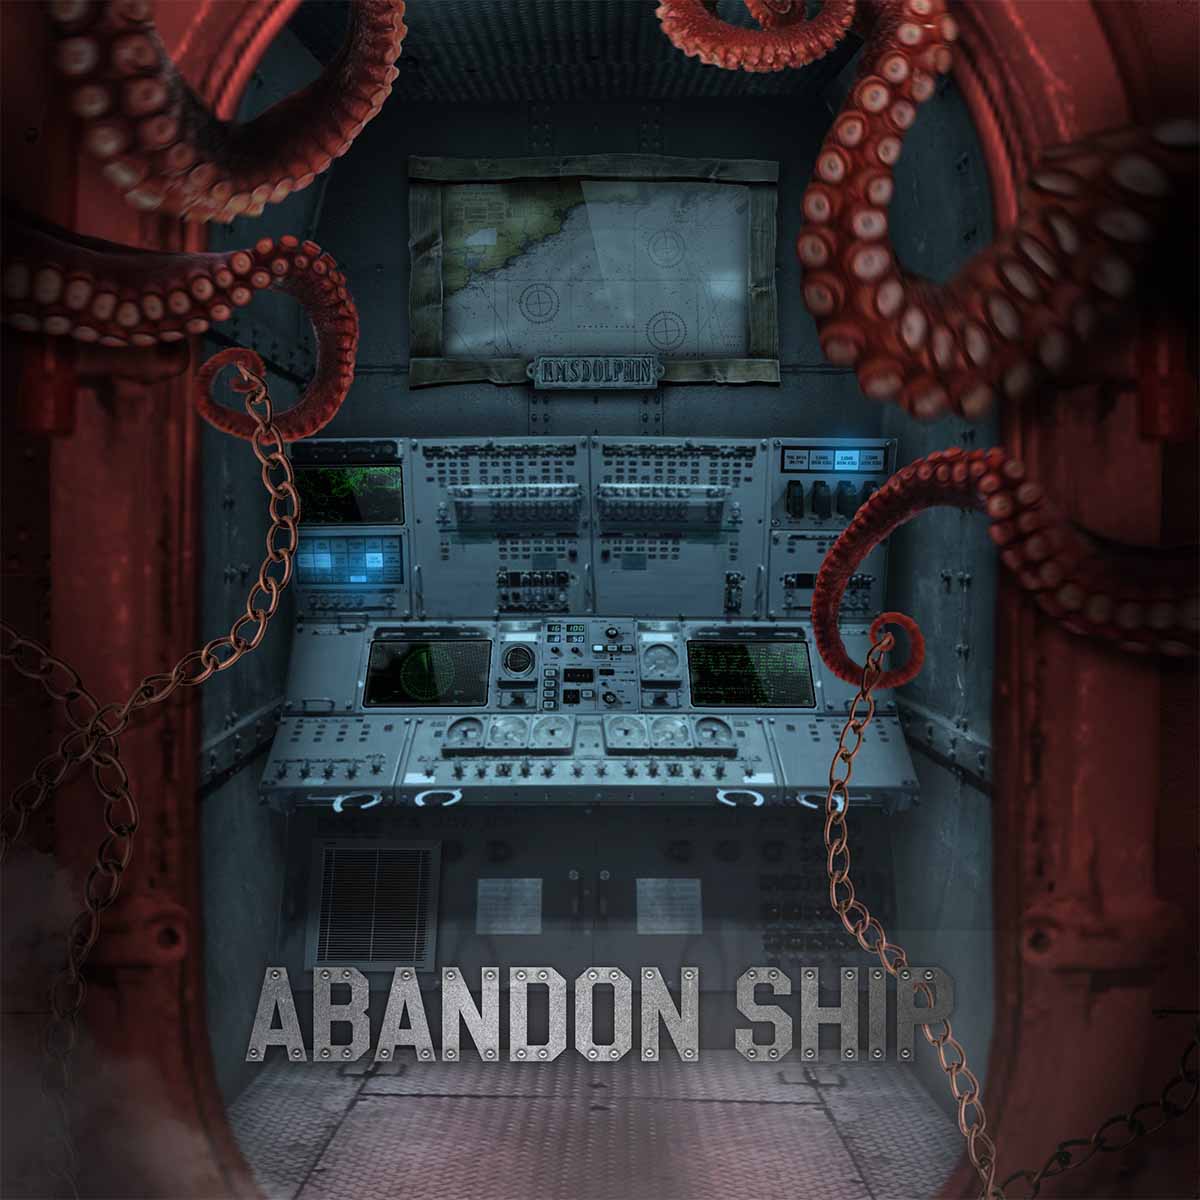 View through a door to the main deck of 'Abandon Ship' escape room, featuring advanced computer consoles, ominous kraken tentacles, and entangled chains, highlighting the ship's mysterious and interactive puzzle environment